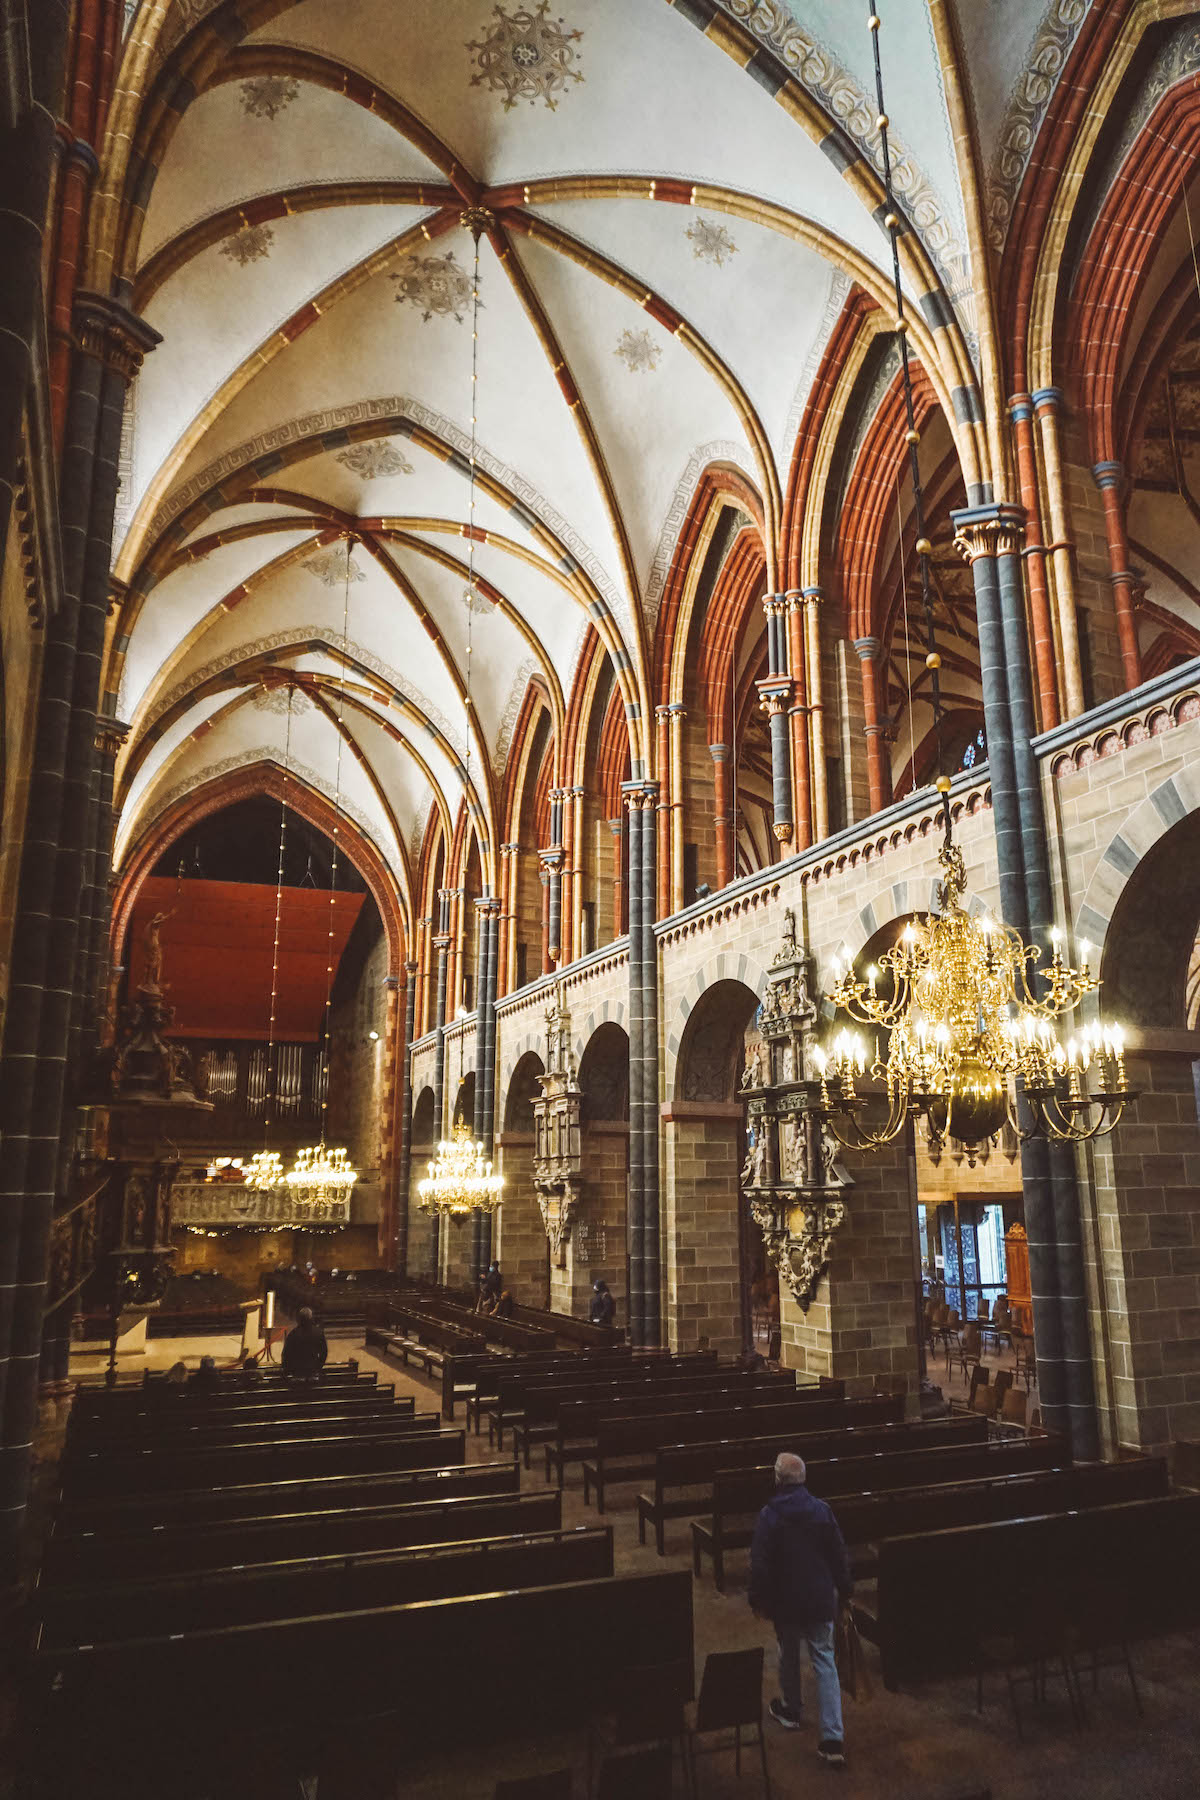 Interior of the Bremen Cathedral